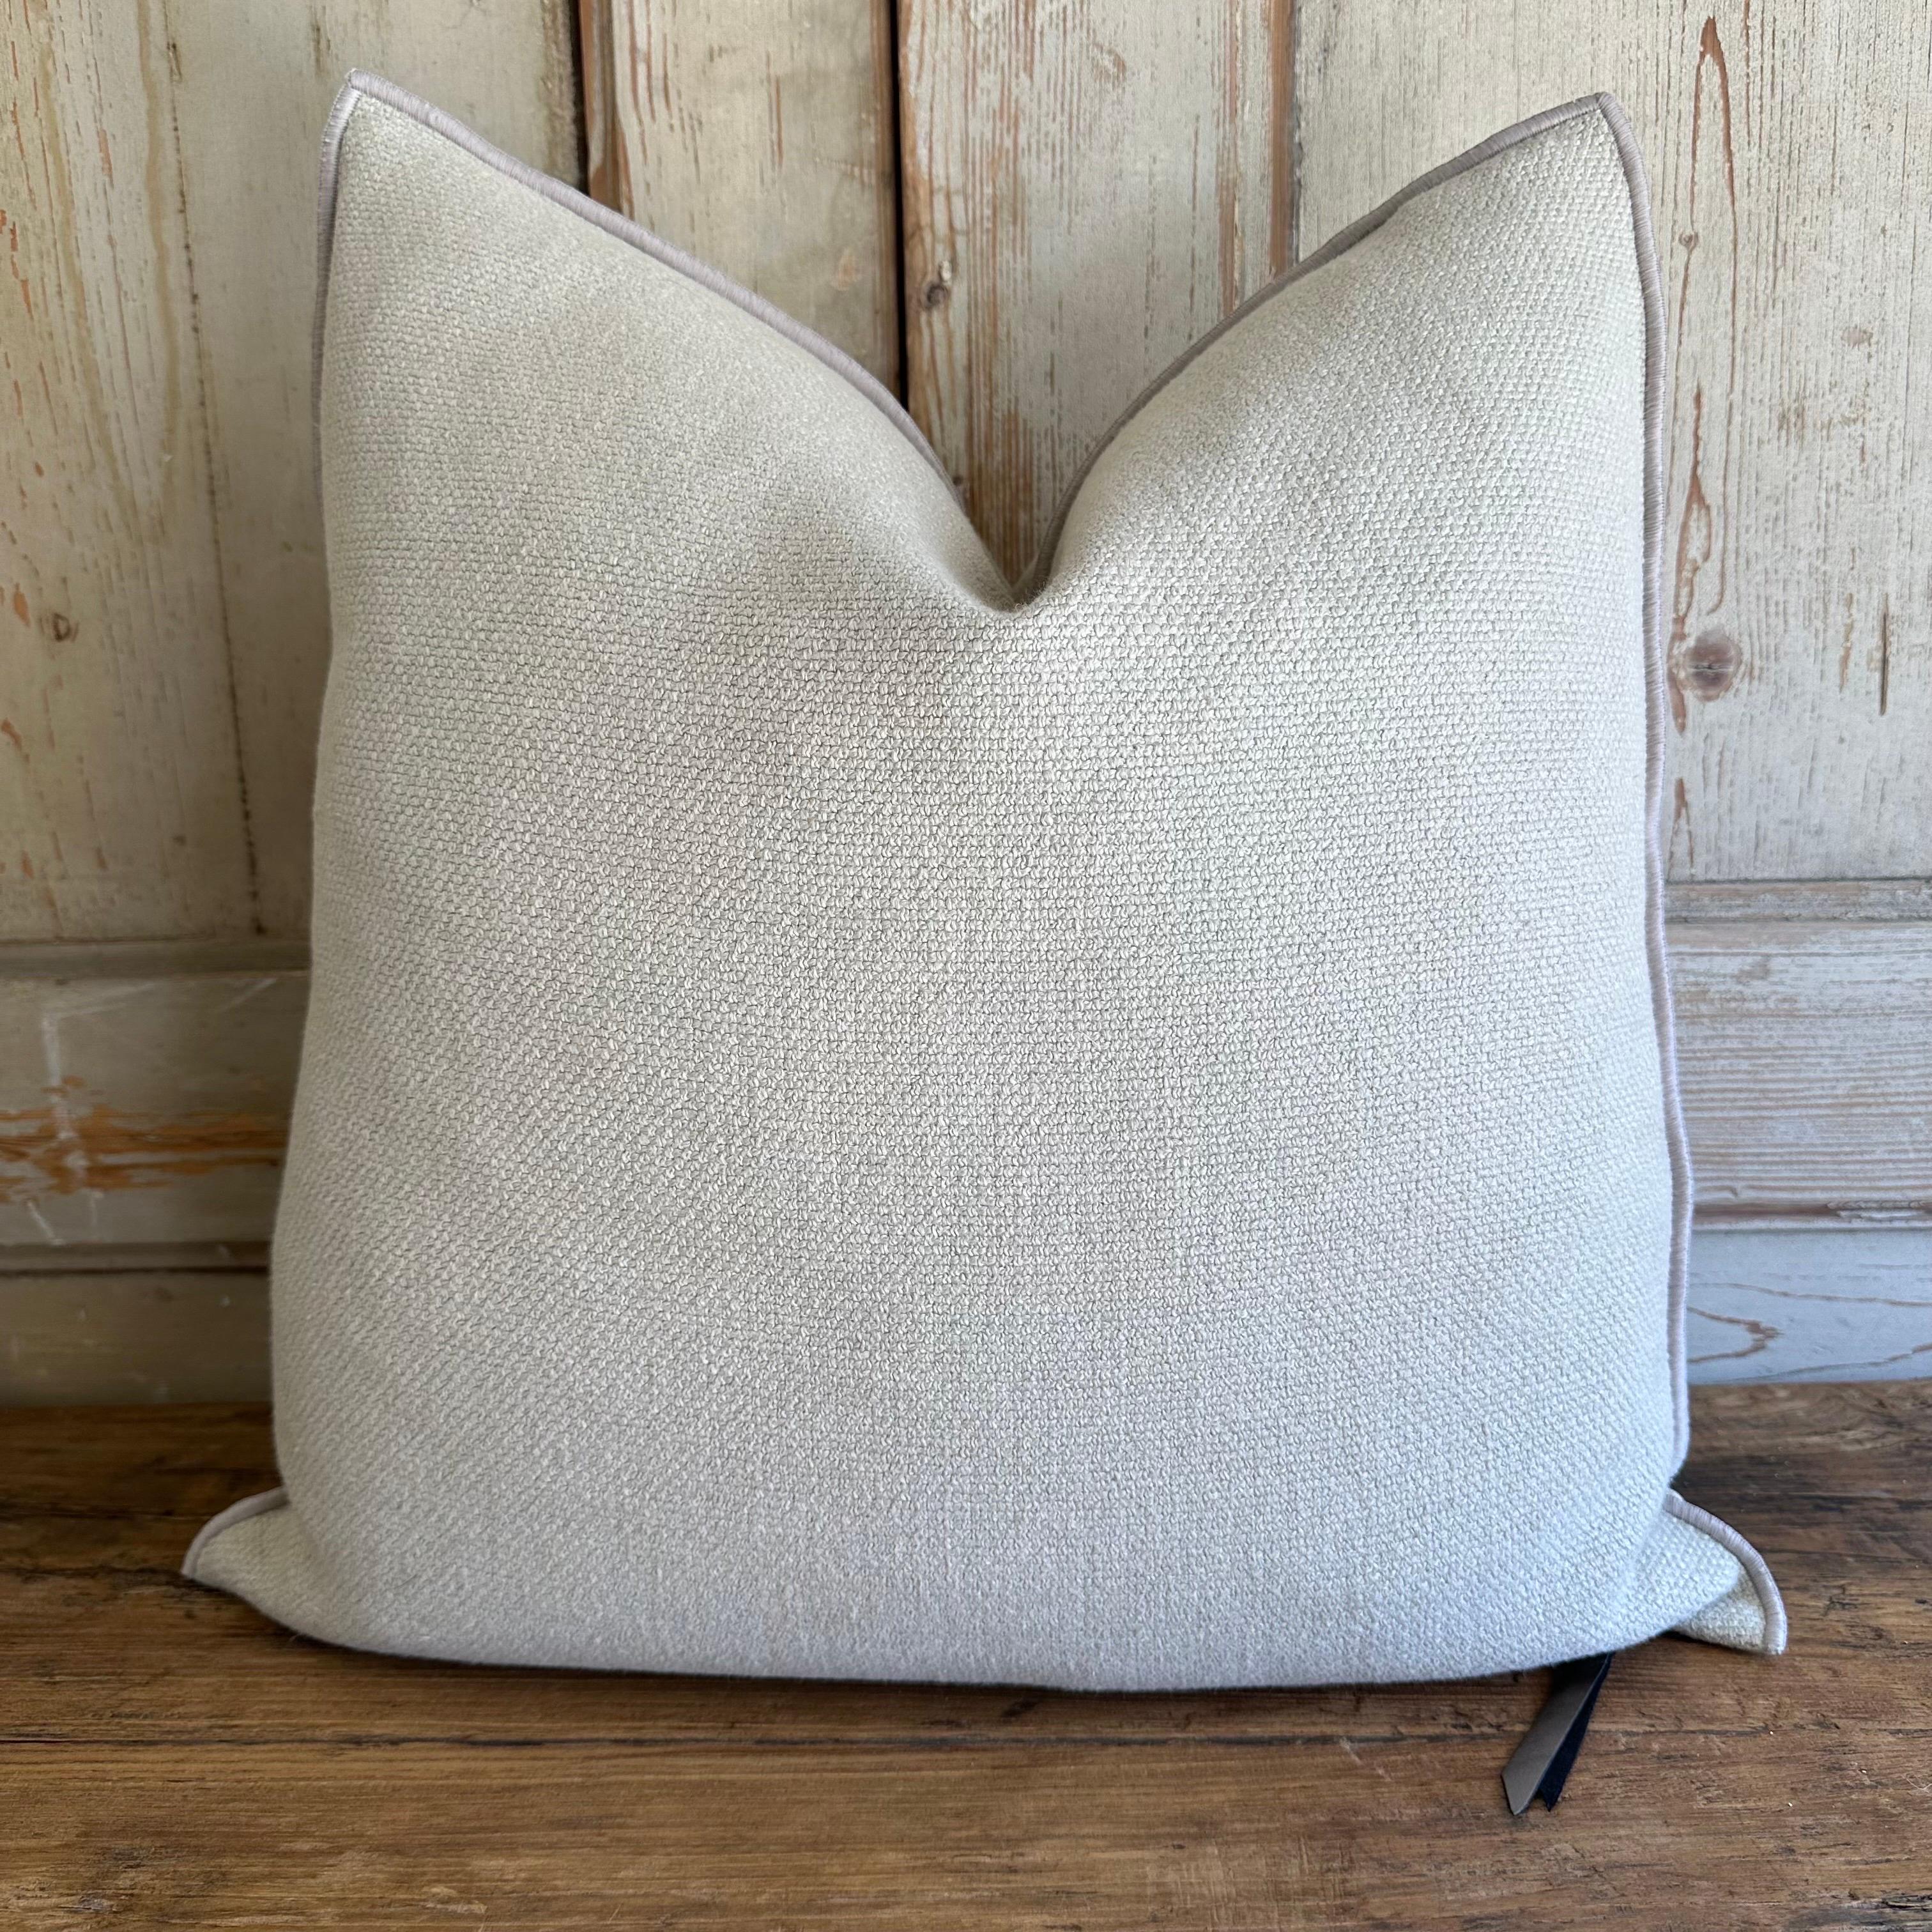 Fromentera:
Custom linen blend accent pillow. 
Color: ciment: A pretty light gray colored nubby style pillow with a stitched edge, metal zipper closure. 
Size: 22” x 22”
Our pillows are constructed with vintage one of a kind textiles from around